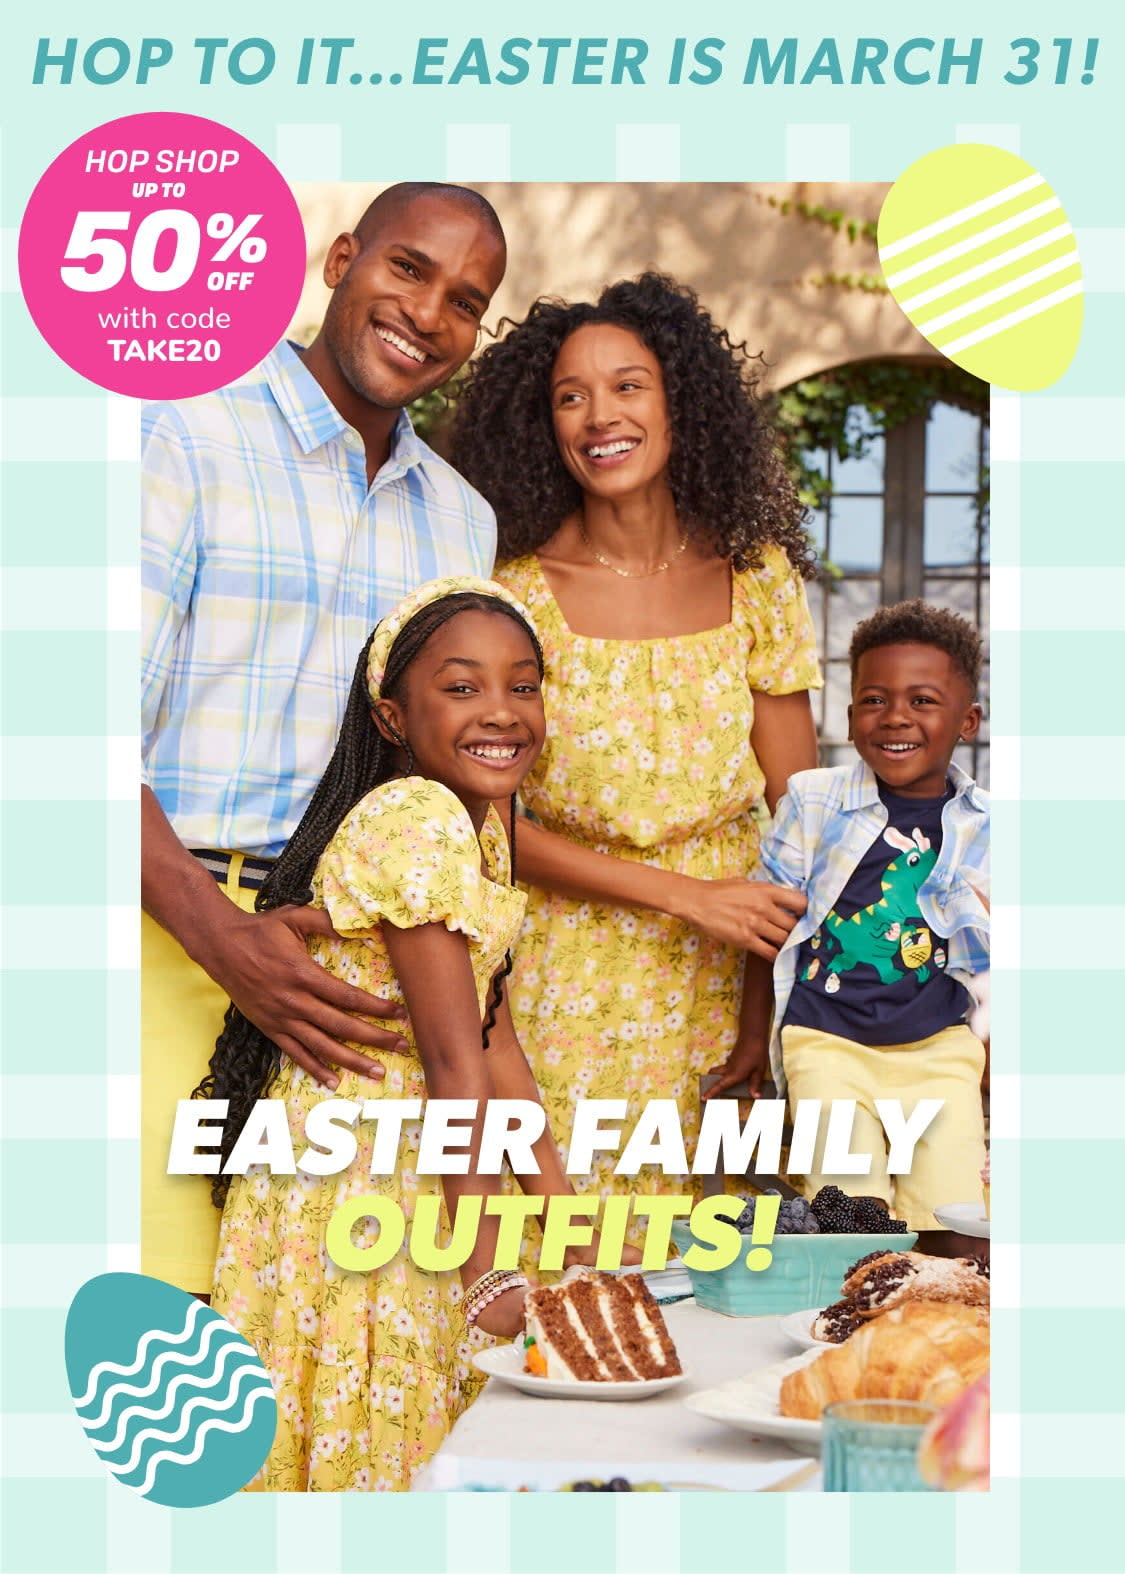 Hop to it…Easter is March 31! EASTER FAMILY OUTFITS! HOP SHOP up to 50% Off